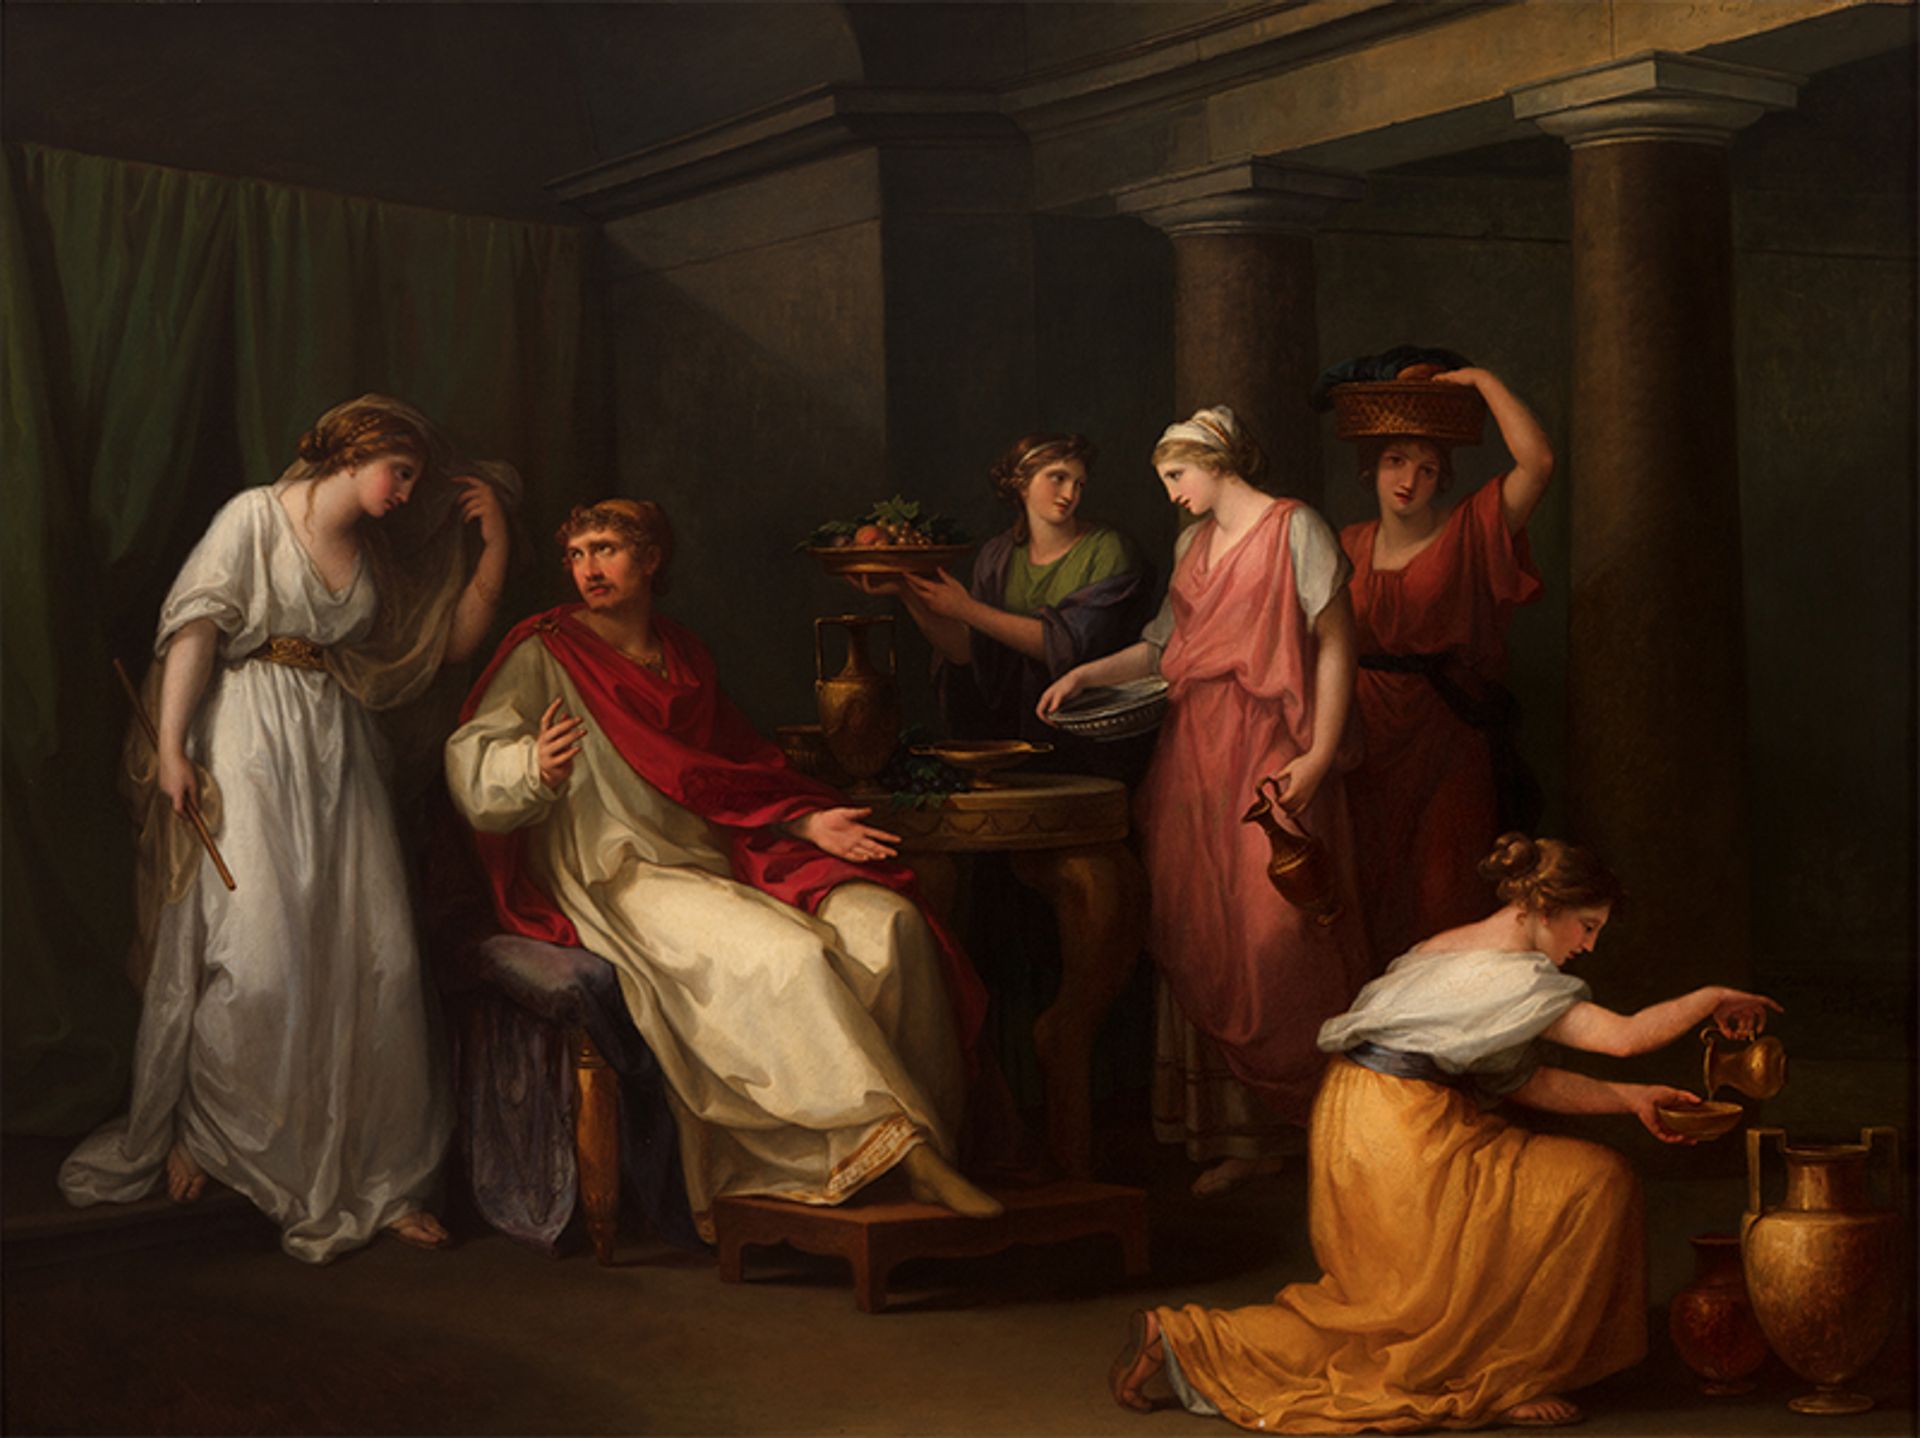 Angelika Kauffmann, Ulysses on the Island of Circe (1793) Courtesy of the Barrett Collection